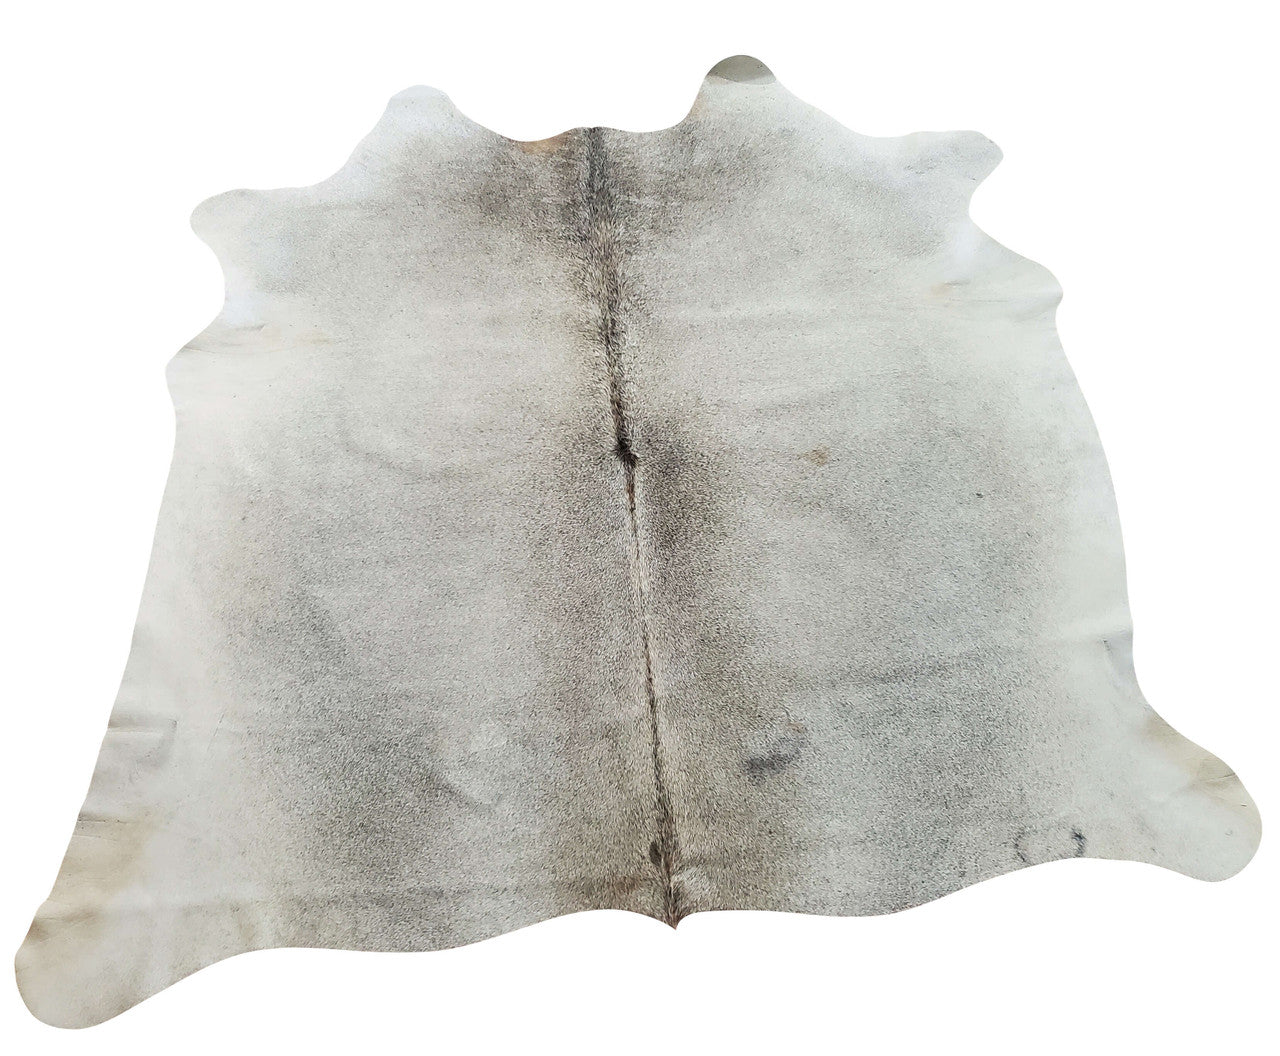 This small light grey cowhide rug for sale is selected for unique pattern, tanned to perfection and great for any space even your truck interior.